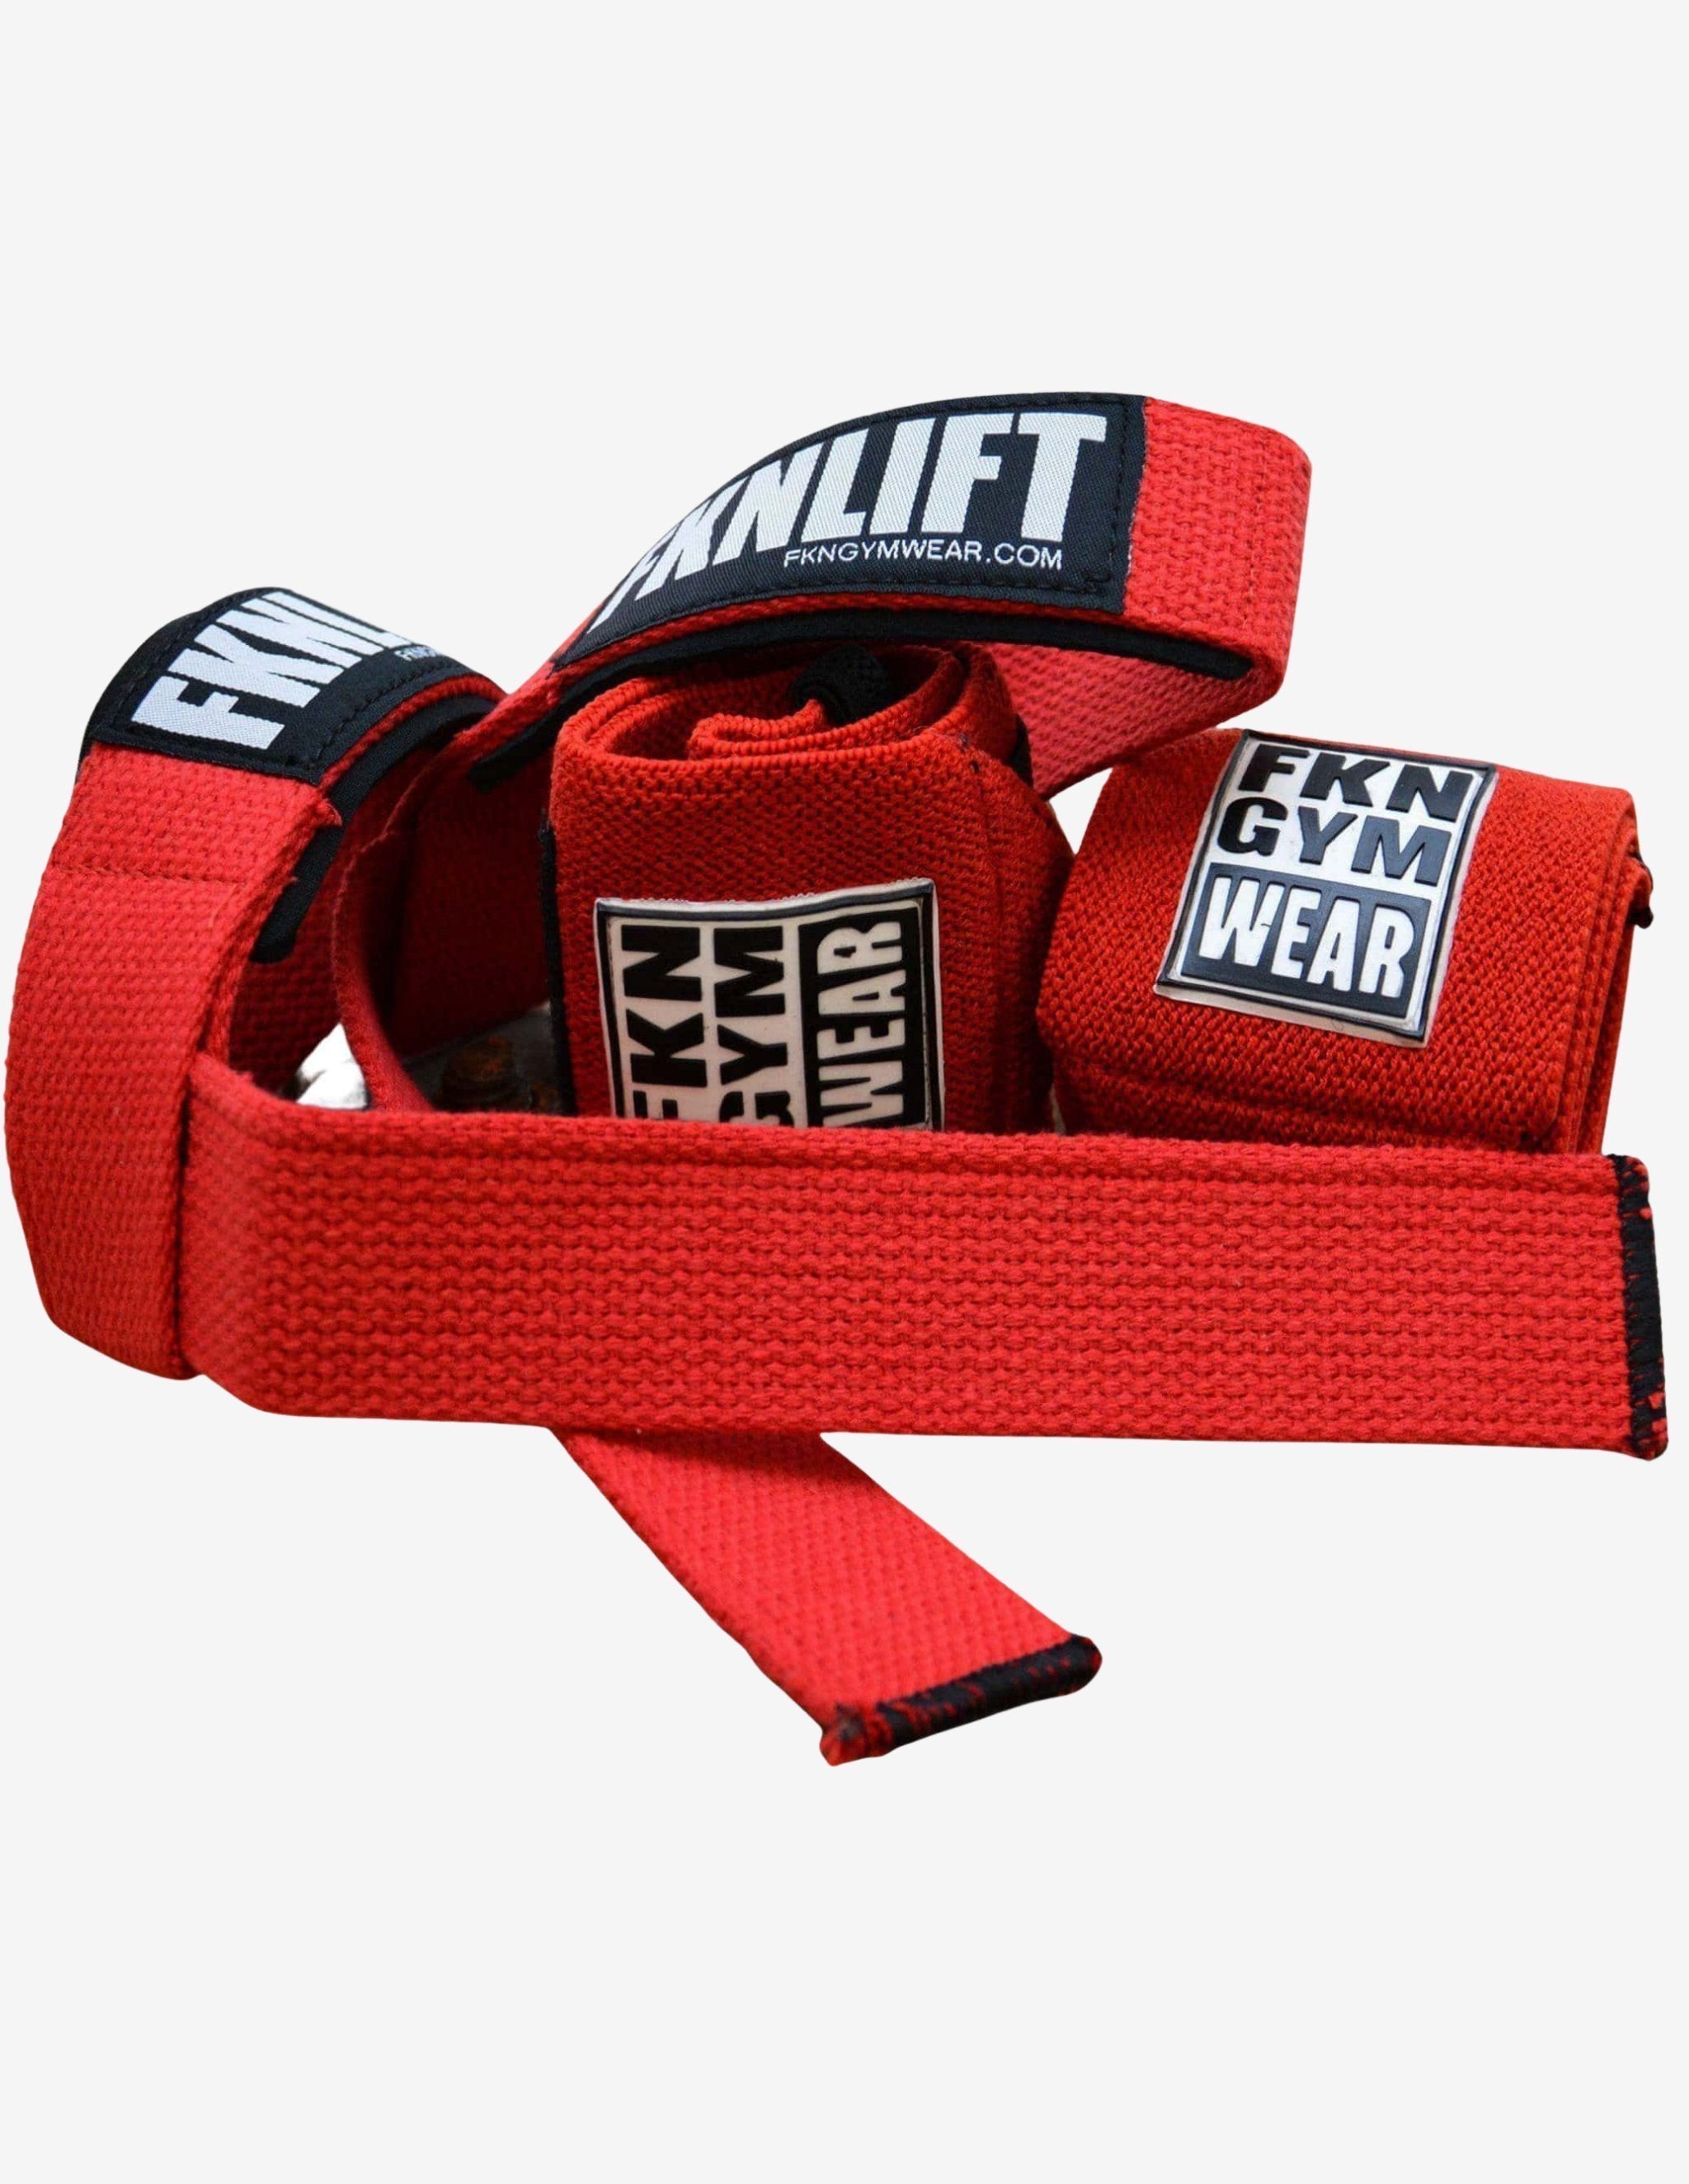 Lifting Straps & Wrist Wraps Pack-Accessories Sets-FKN Gym Wear-Guru Muscle